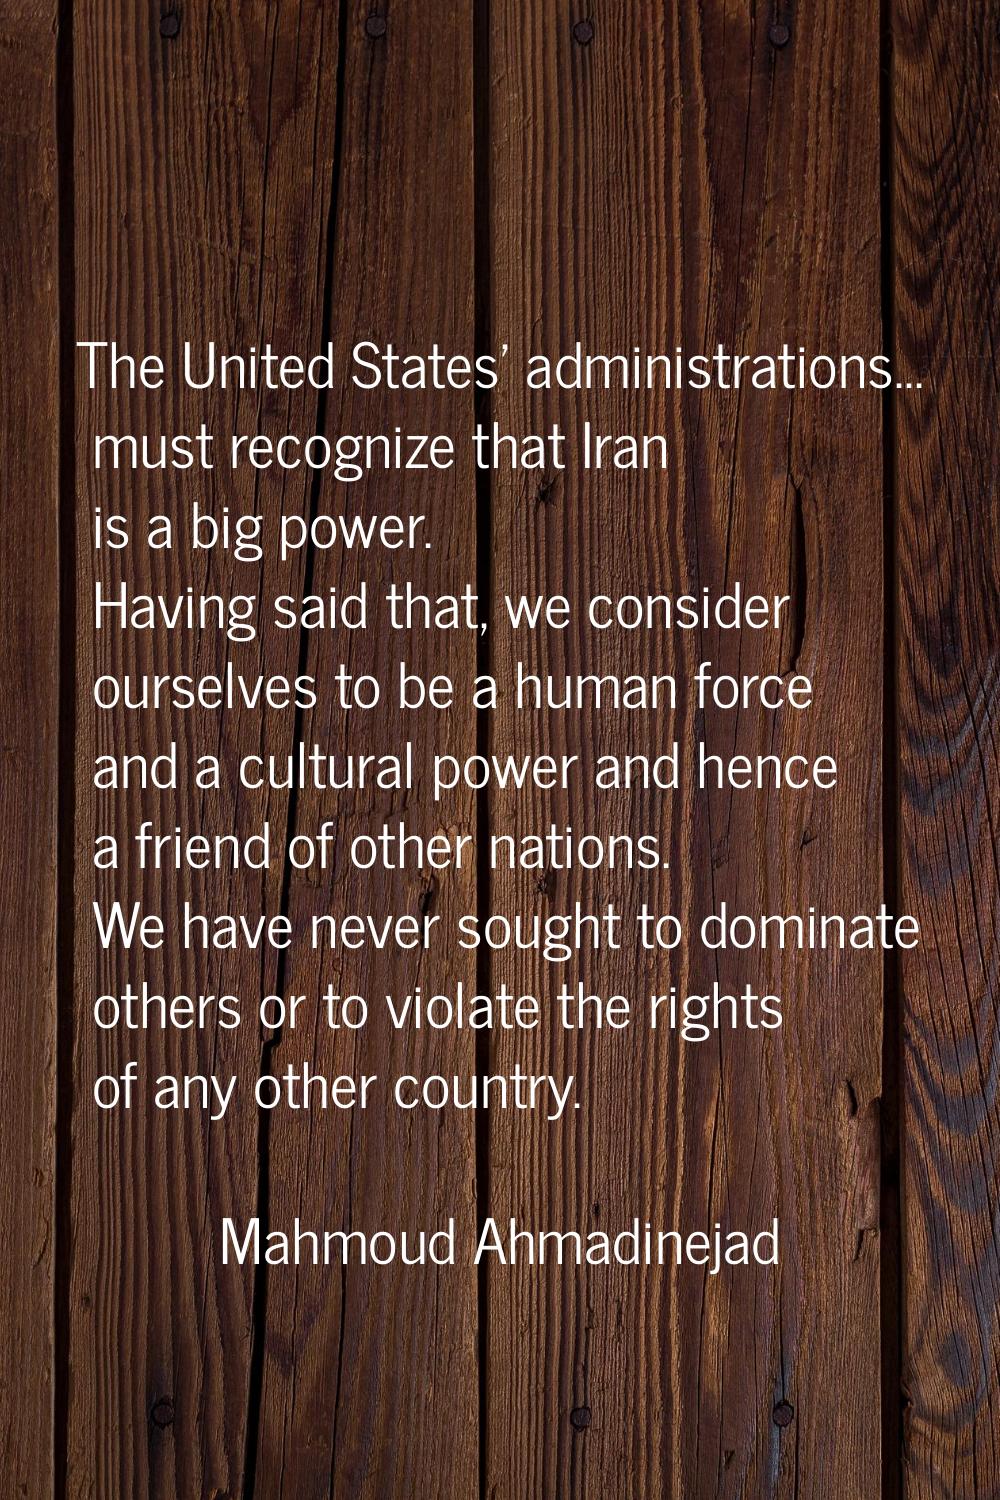 The United States' administrations... must recognize that Iran is a big power. Having said that, we